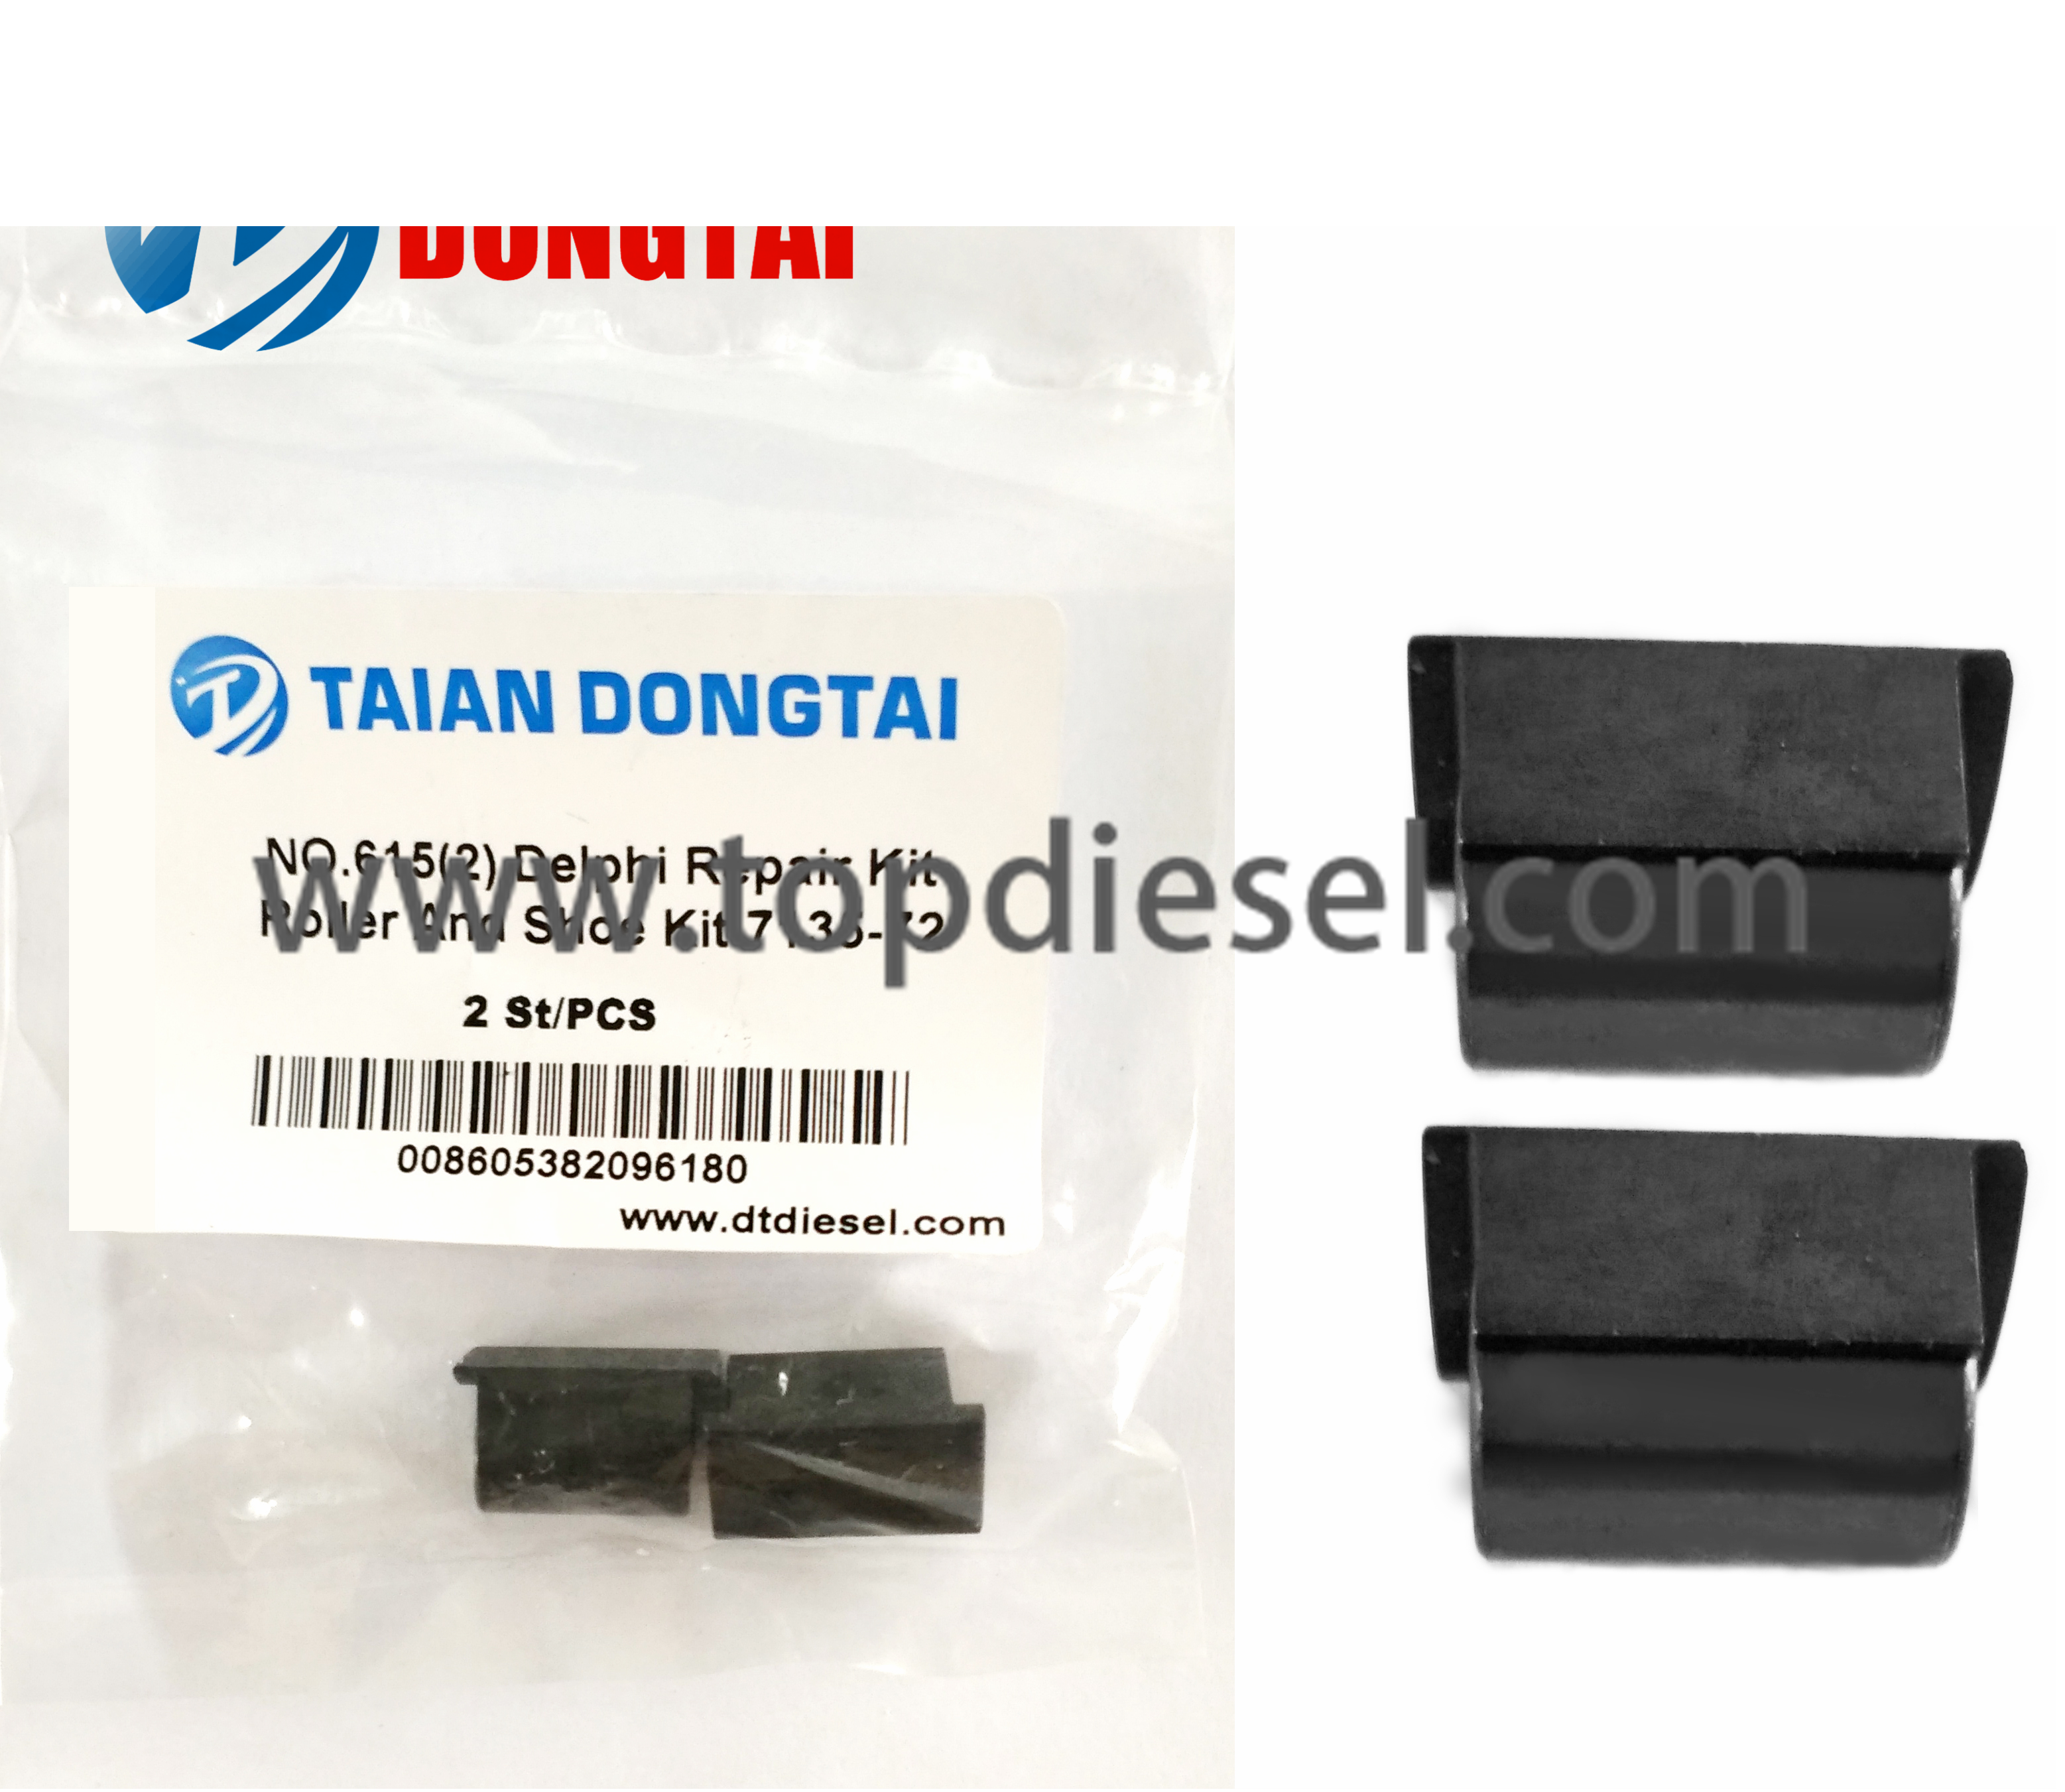 2017 New Style Ultrasonic Tank Cleaner Dt 4820 - No,615(2)Delphi Repair Kit Roller And Shoe Kit 7135-72 2Pcs – Dongtai